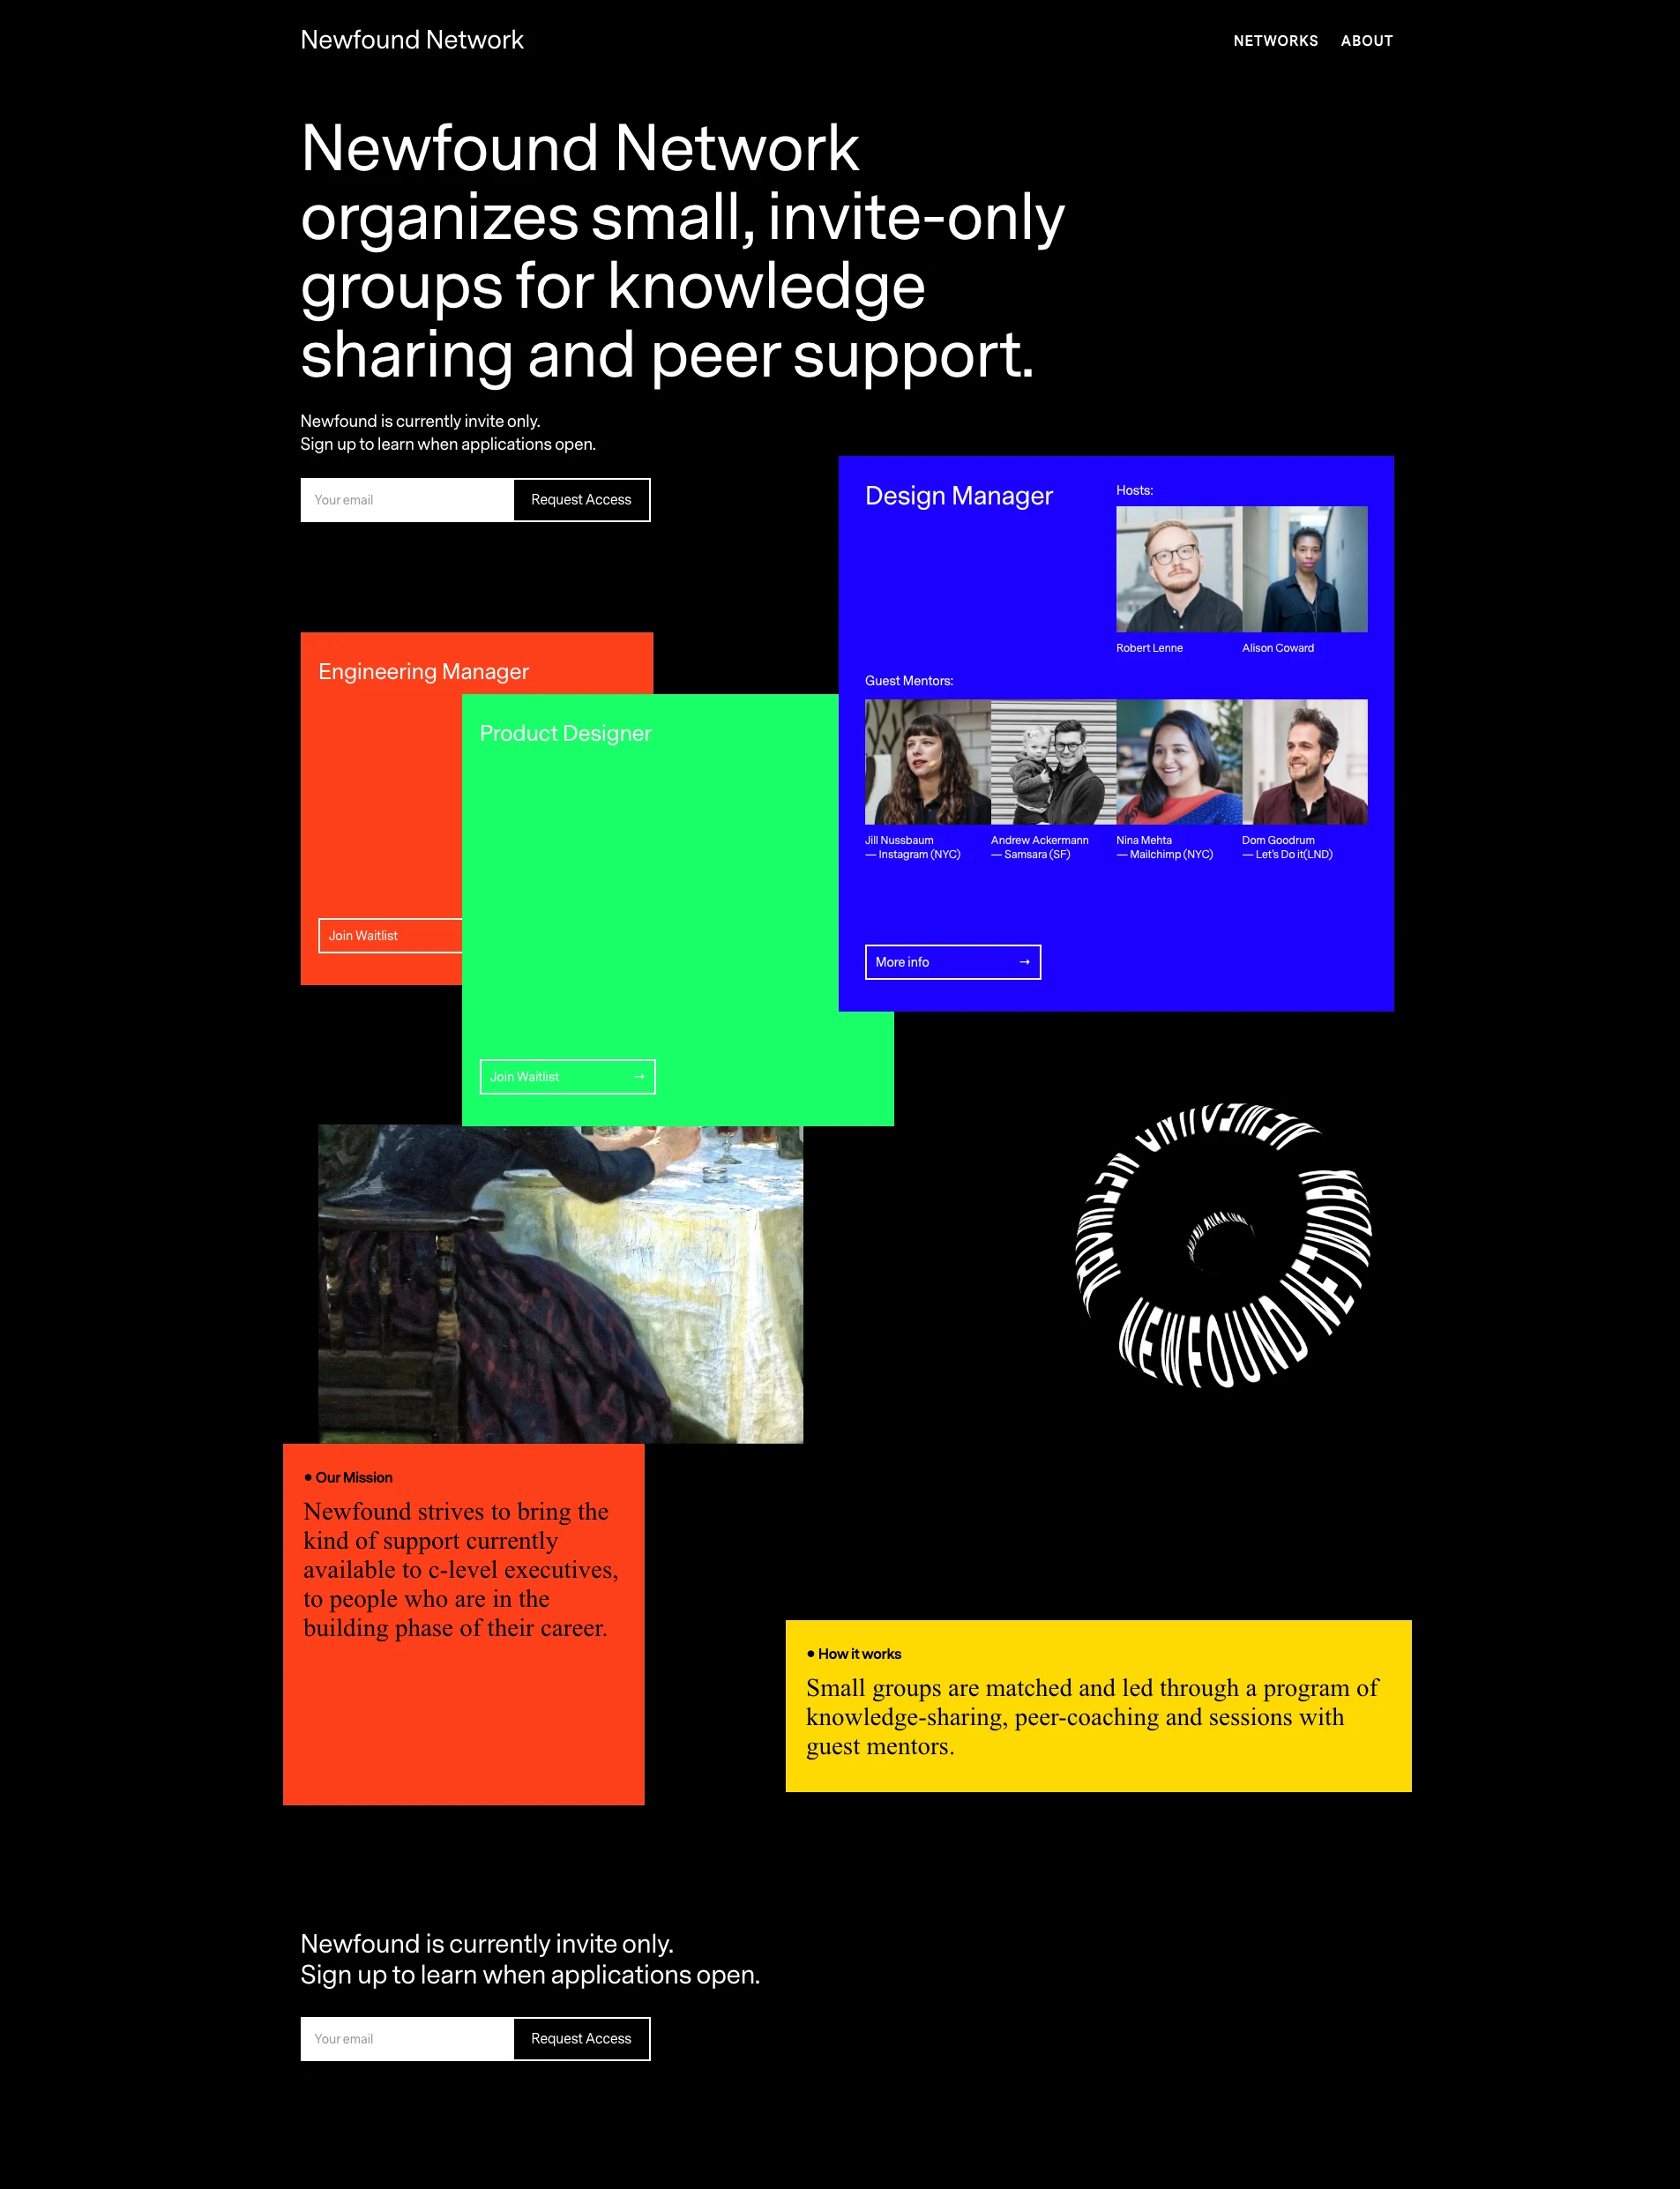 Newfound Network Landing Page Example: Newfound Network organizes small, invite-only groups for knowledge sharing and peer support.